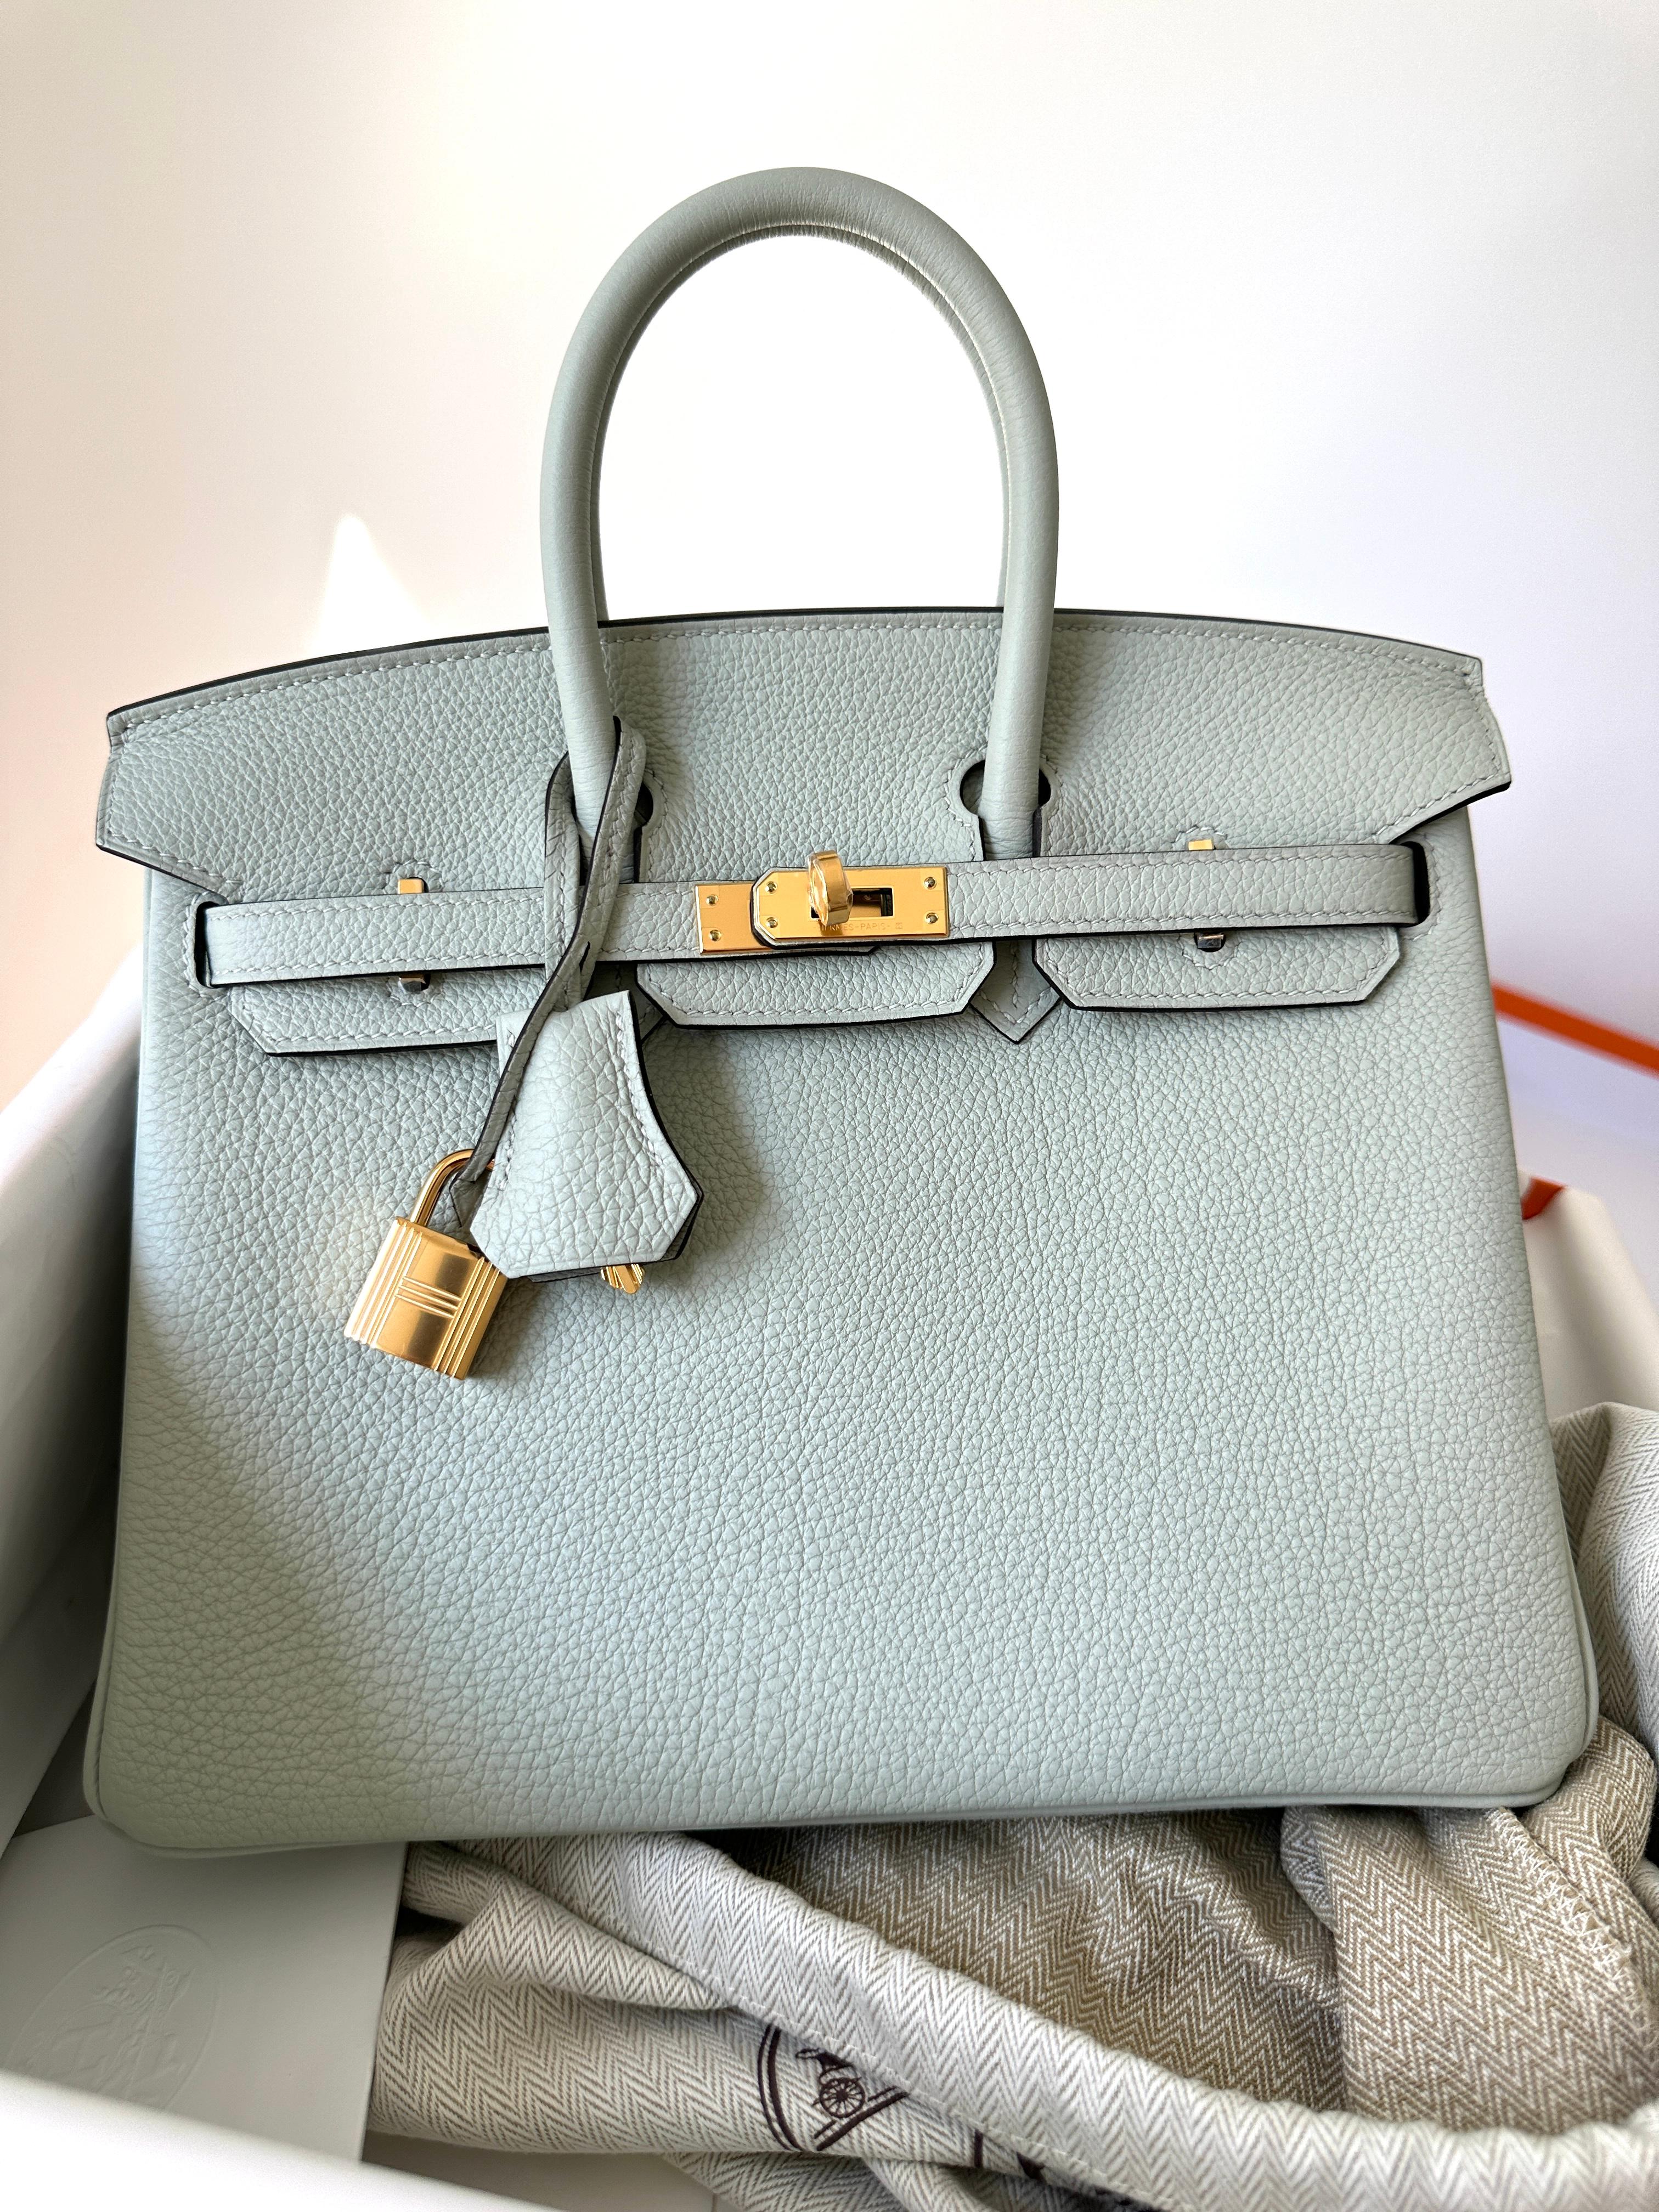 The Hermes Birkin is a luxury handbag from the fashion house Hermes. It is a variation of the iconic Hermes Birkin bag, which was first introduced in 1984 and has since become one of the most sought-after luxury handbags in the world.

Brand new